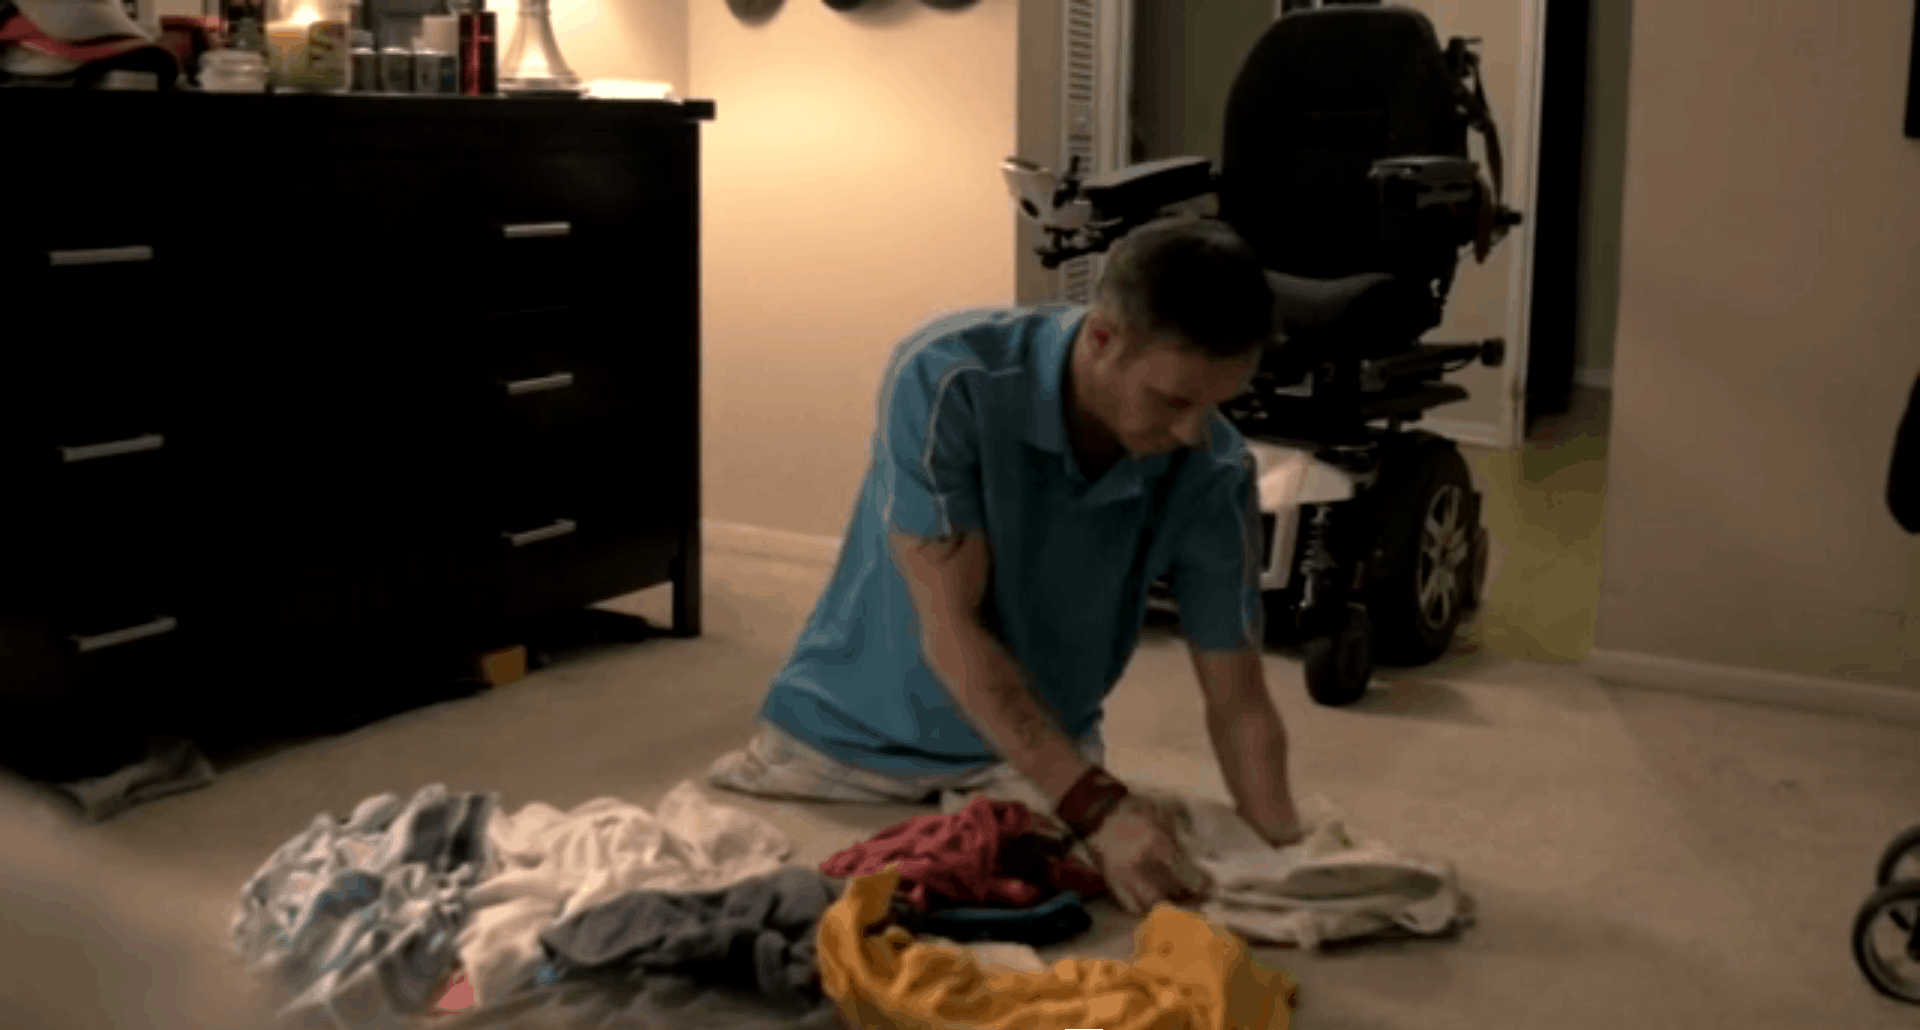 This triple-amputee vet doesn’t let his disability slow him down on laundry day